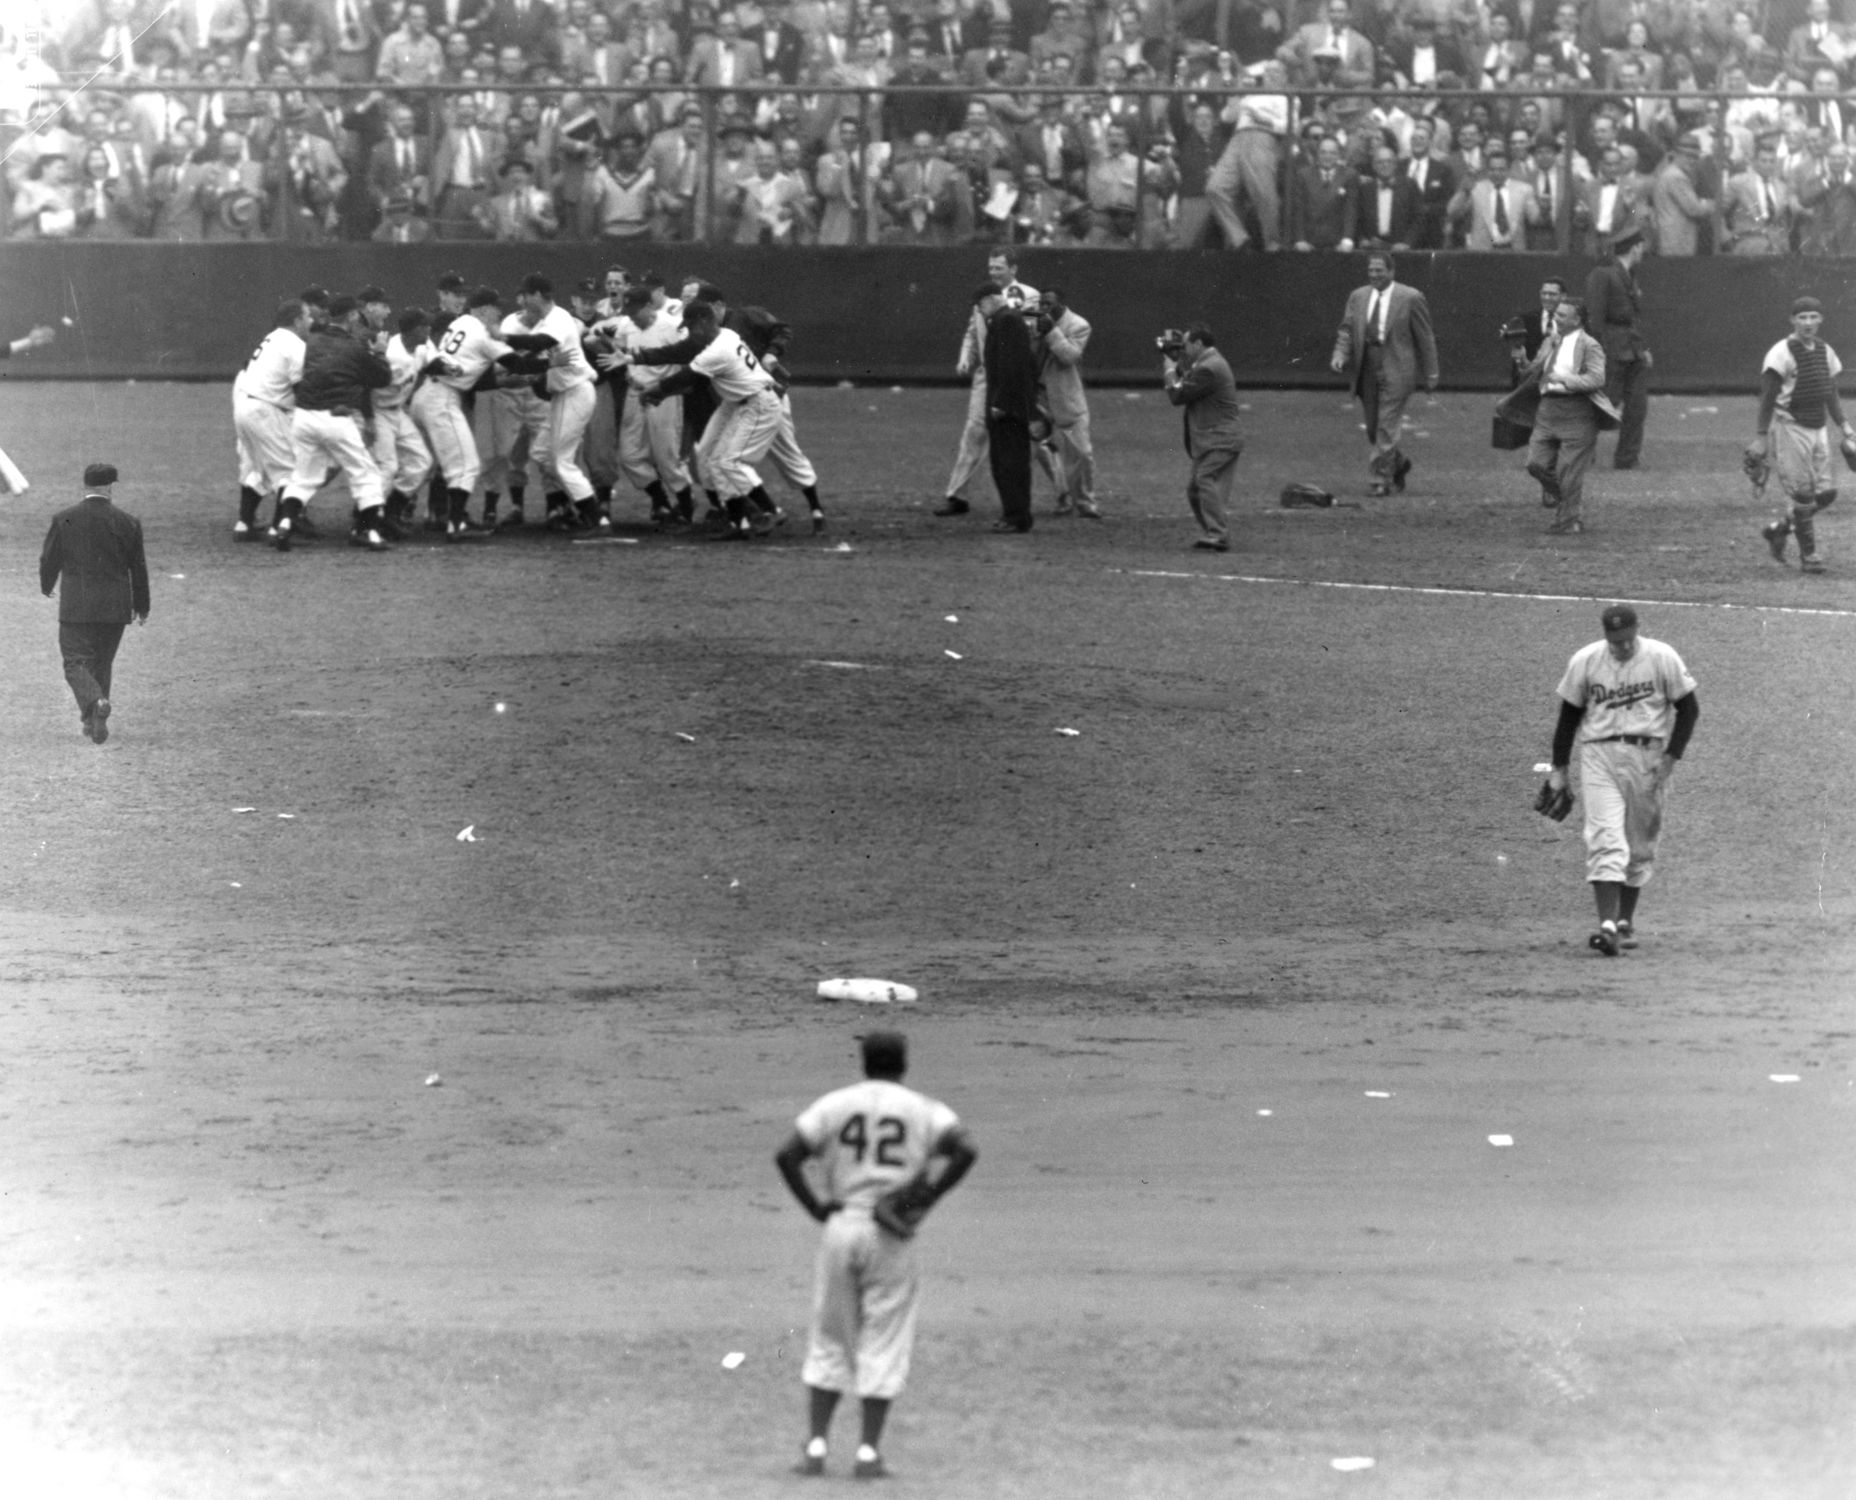 Players greet Thomson at home plate after he hits the game winning home run.